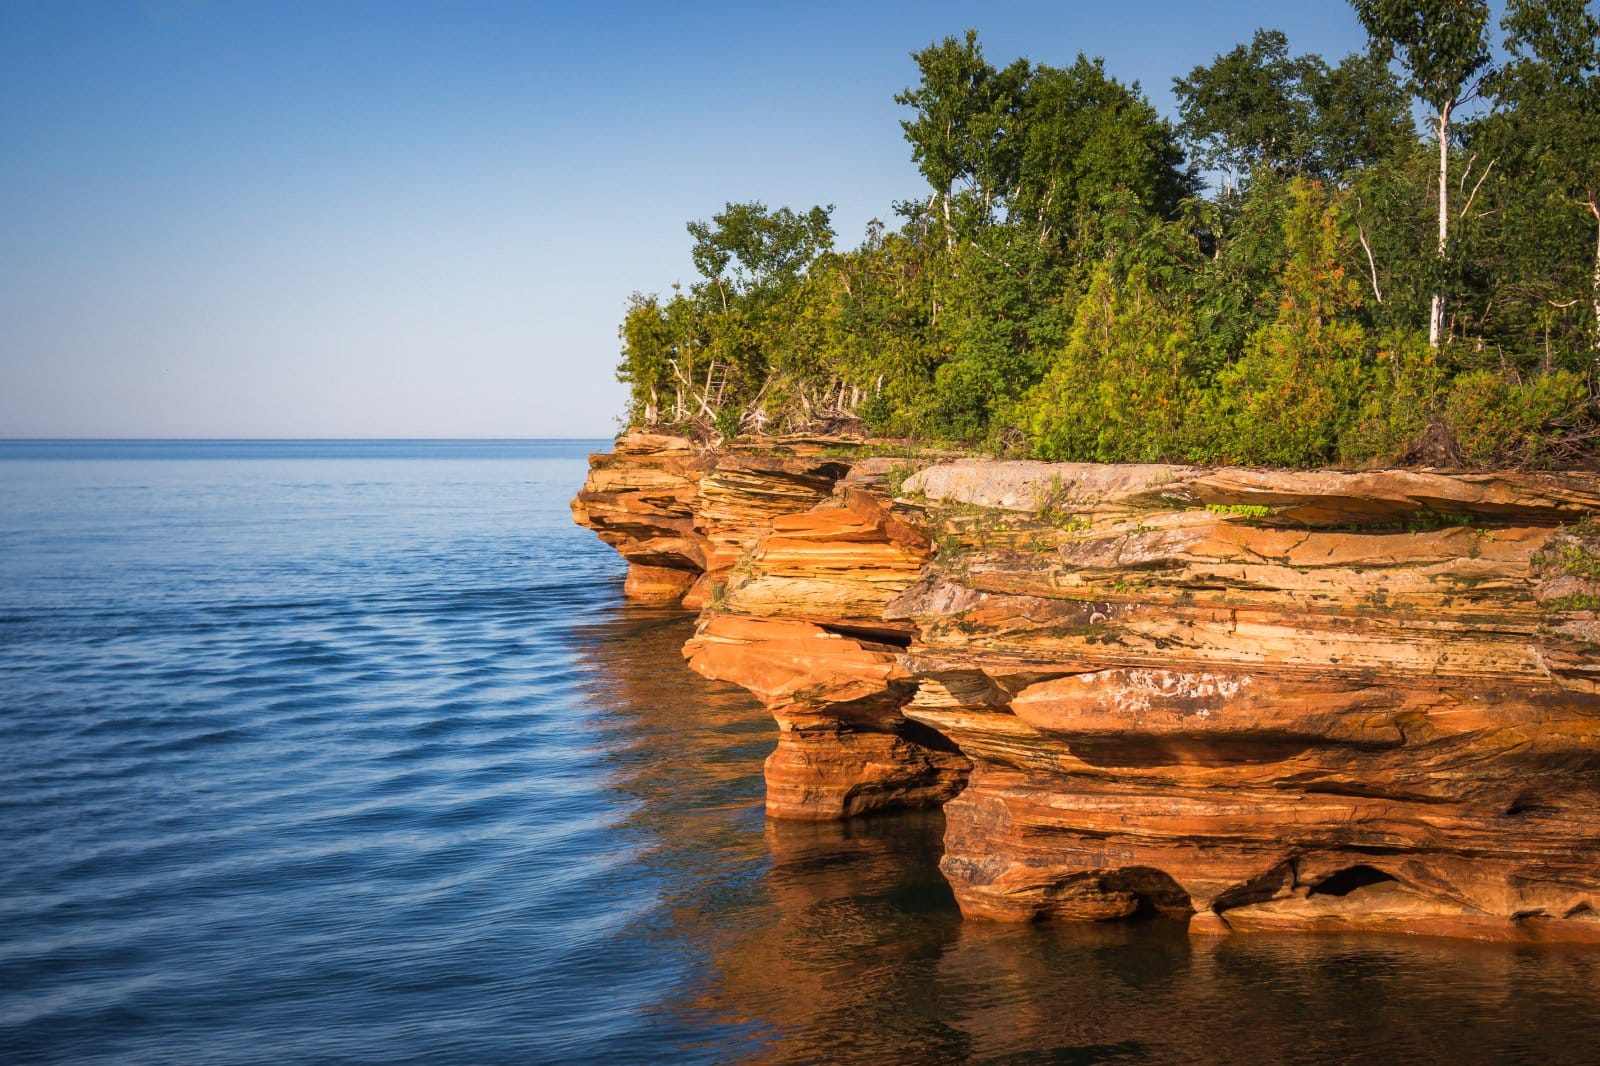 <p class="wp-caption-text">Image Credit: Shutterstock / Gottography</p>  <p><span>Located in Lake Superior, the Apostle Islands are known for their historic lighthouses, sandstone sea caves, and pristine natural beauty. It’s an extraordinary destination for kayaking, exploring, and connecting with nature on the freshwater sea.</span></p>